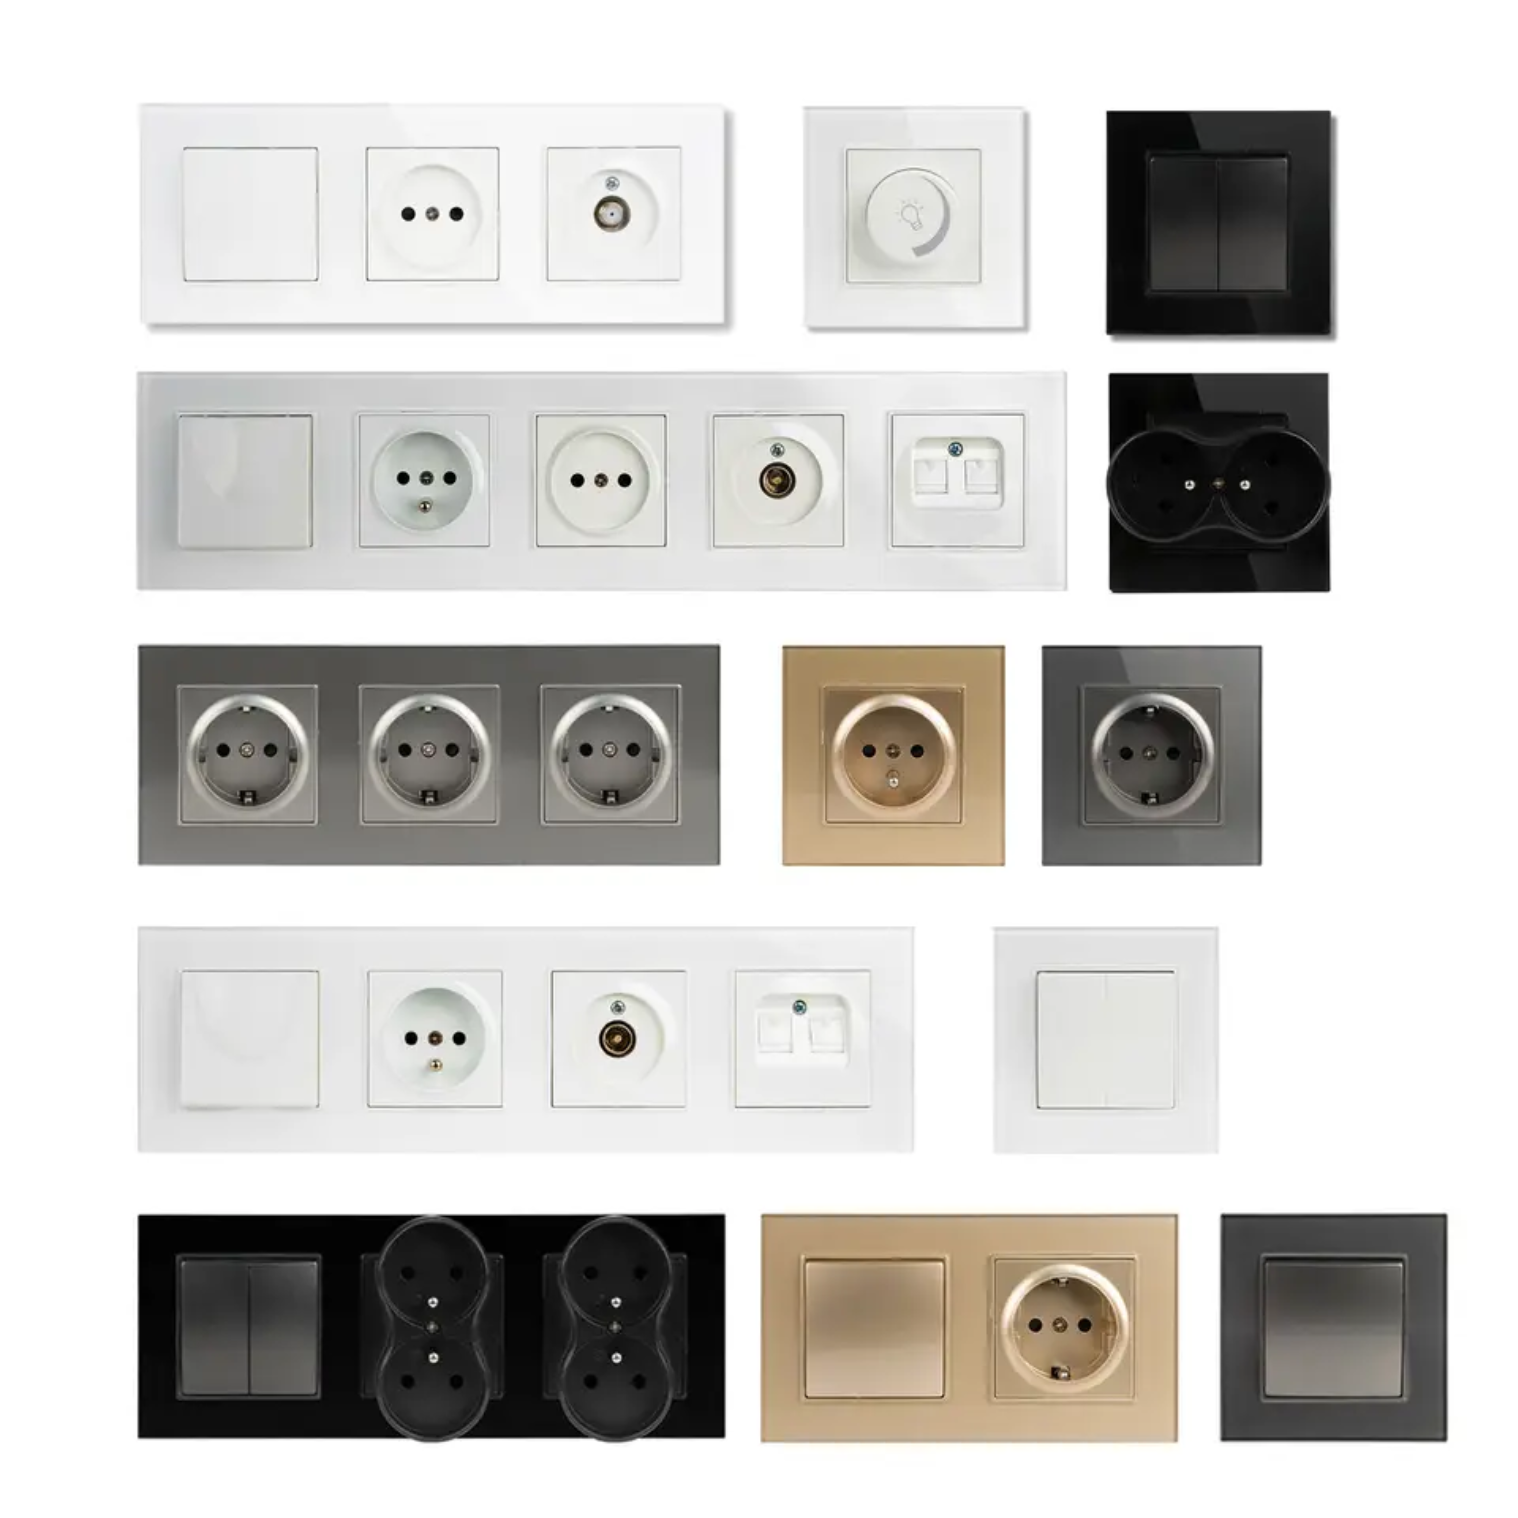 1G 220v Glass Panel Eu Light Electrical Accessories Wall Switches and Sockets - MVAVA